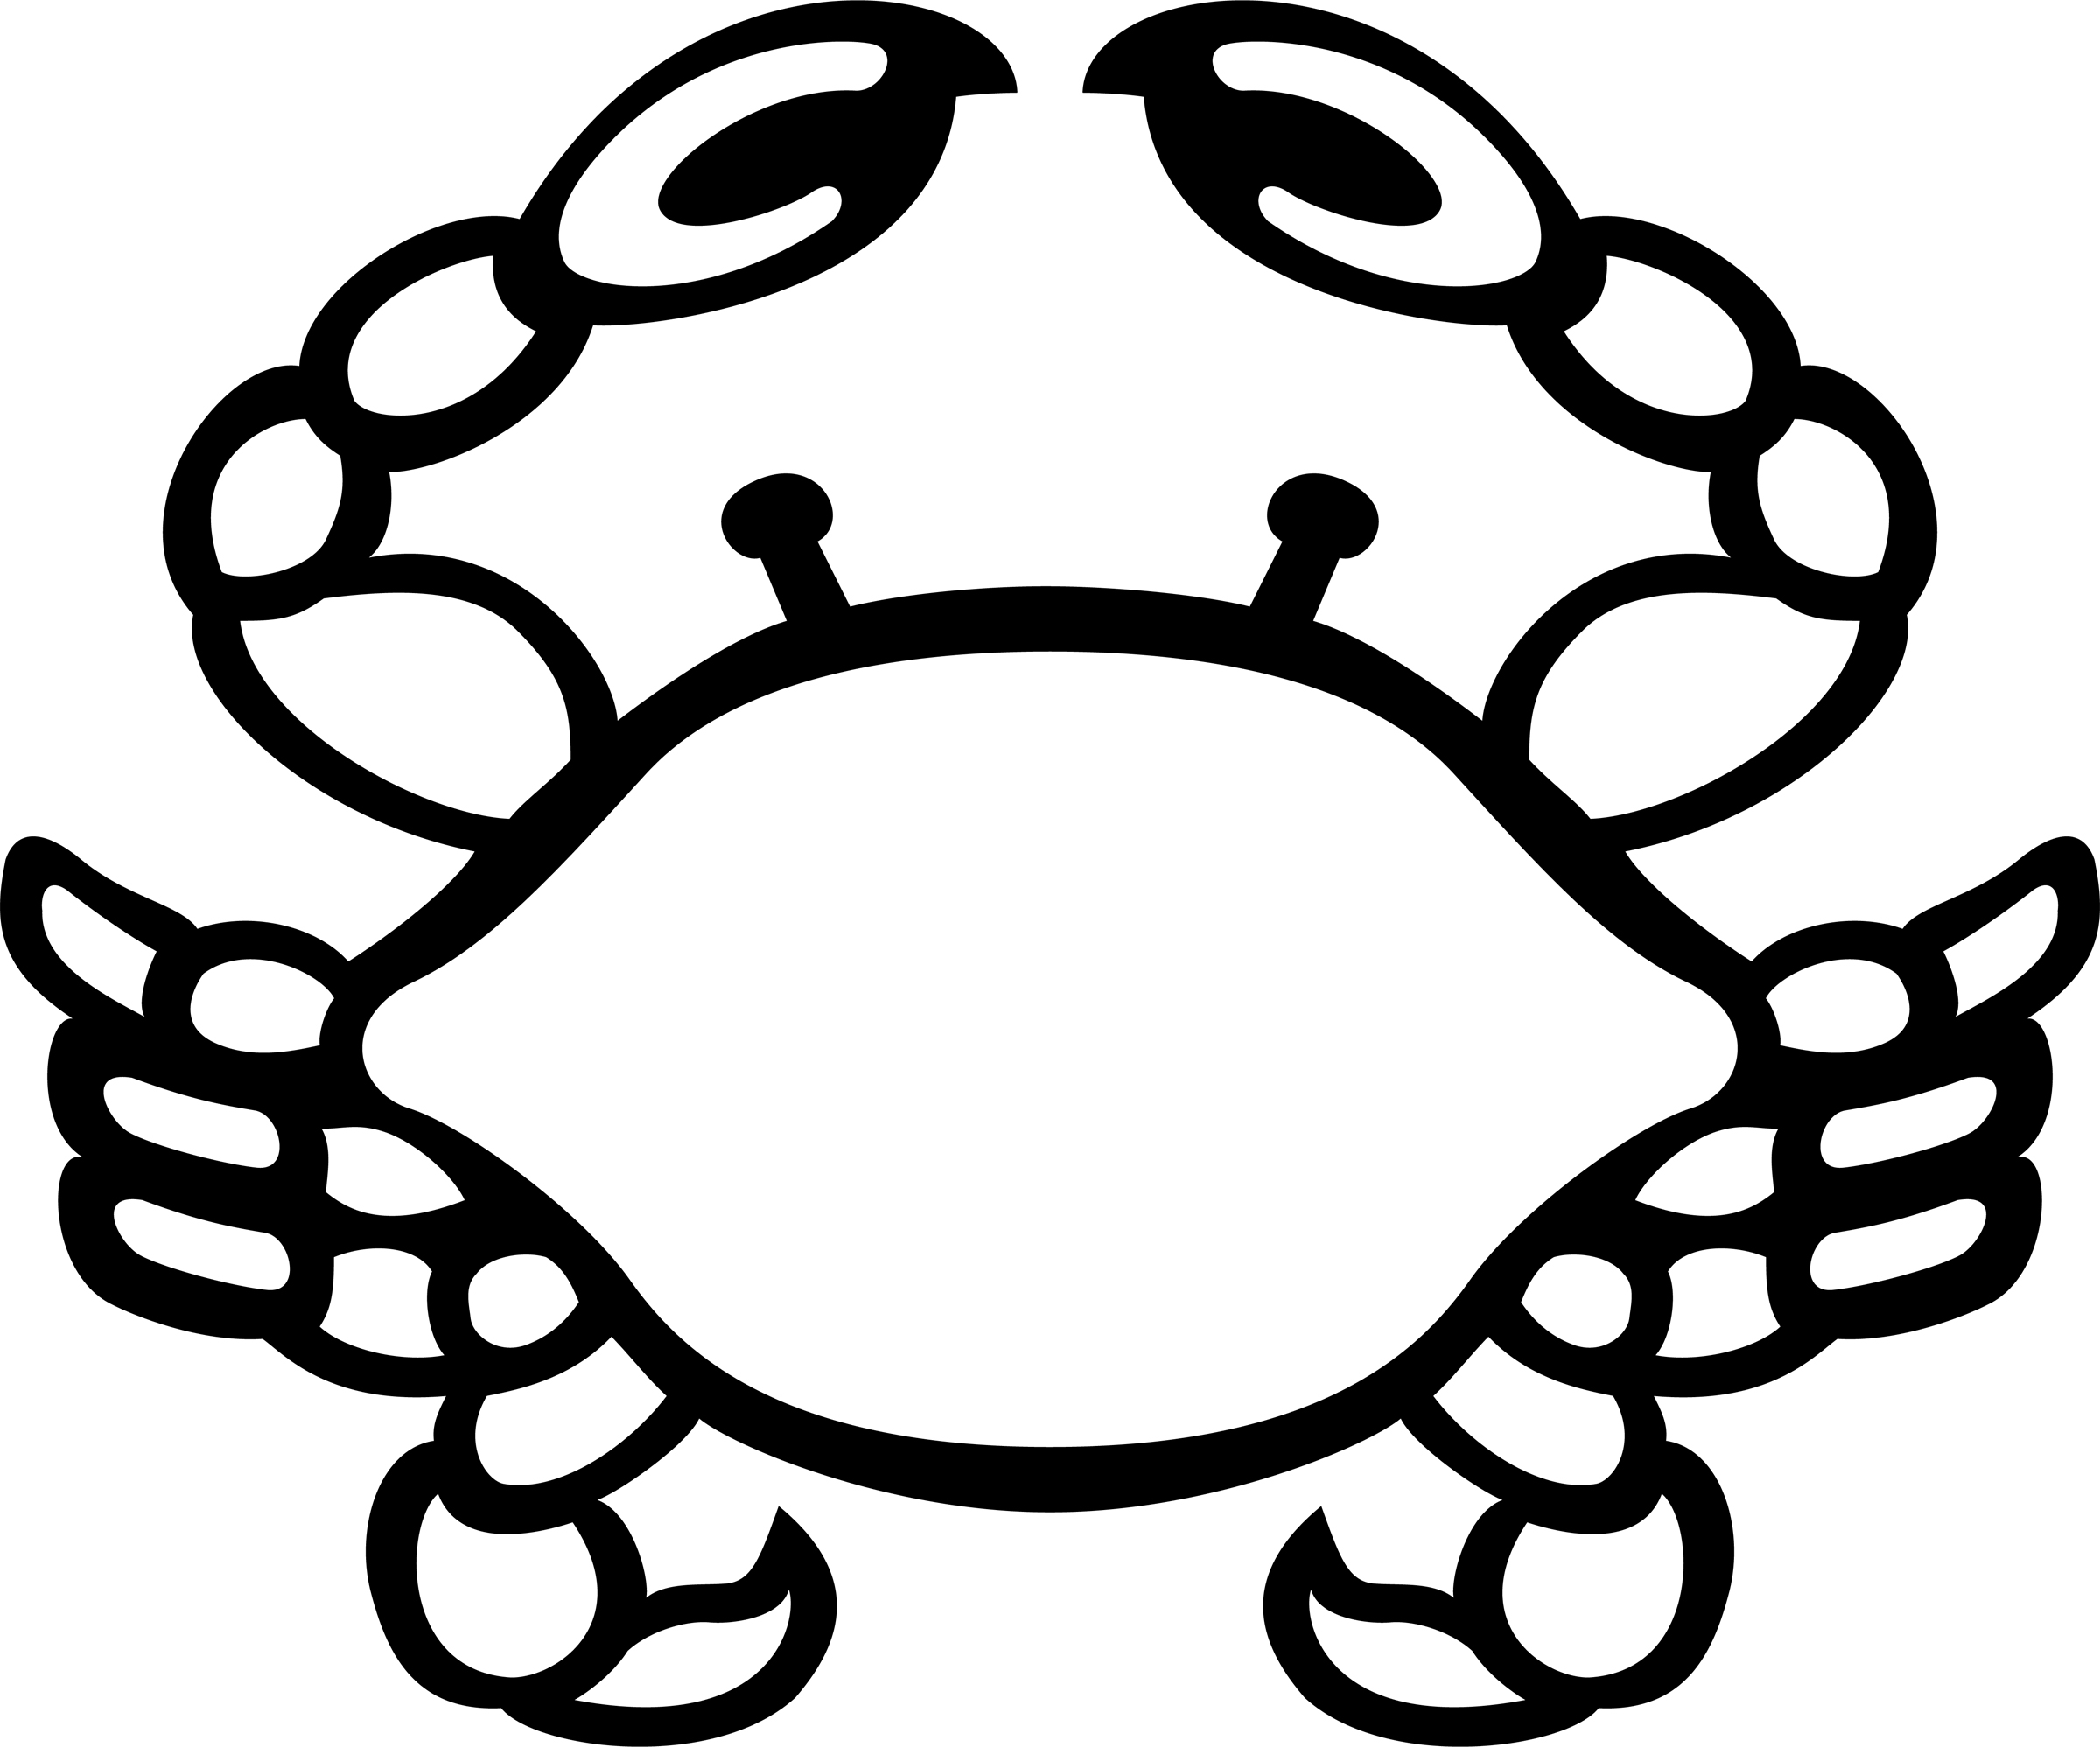 Crab Clip Art Black And White | Clipart Panda - Free Clipart Images